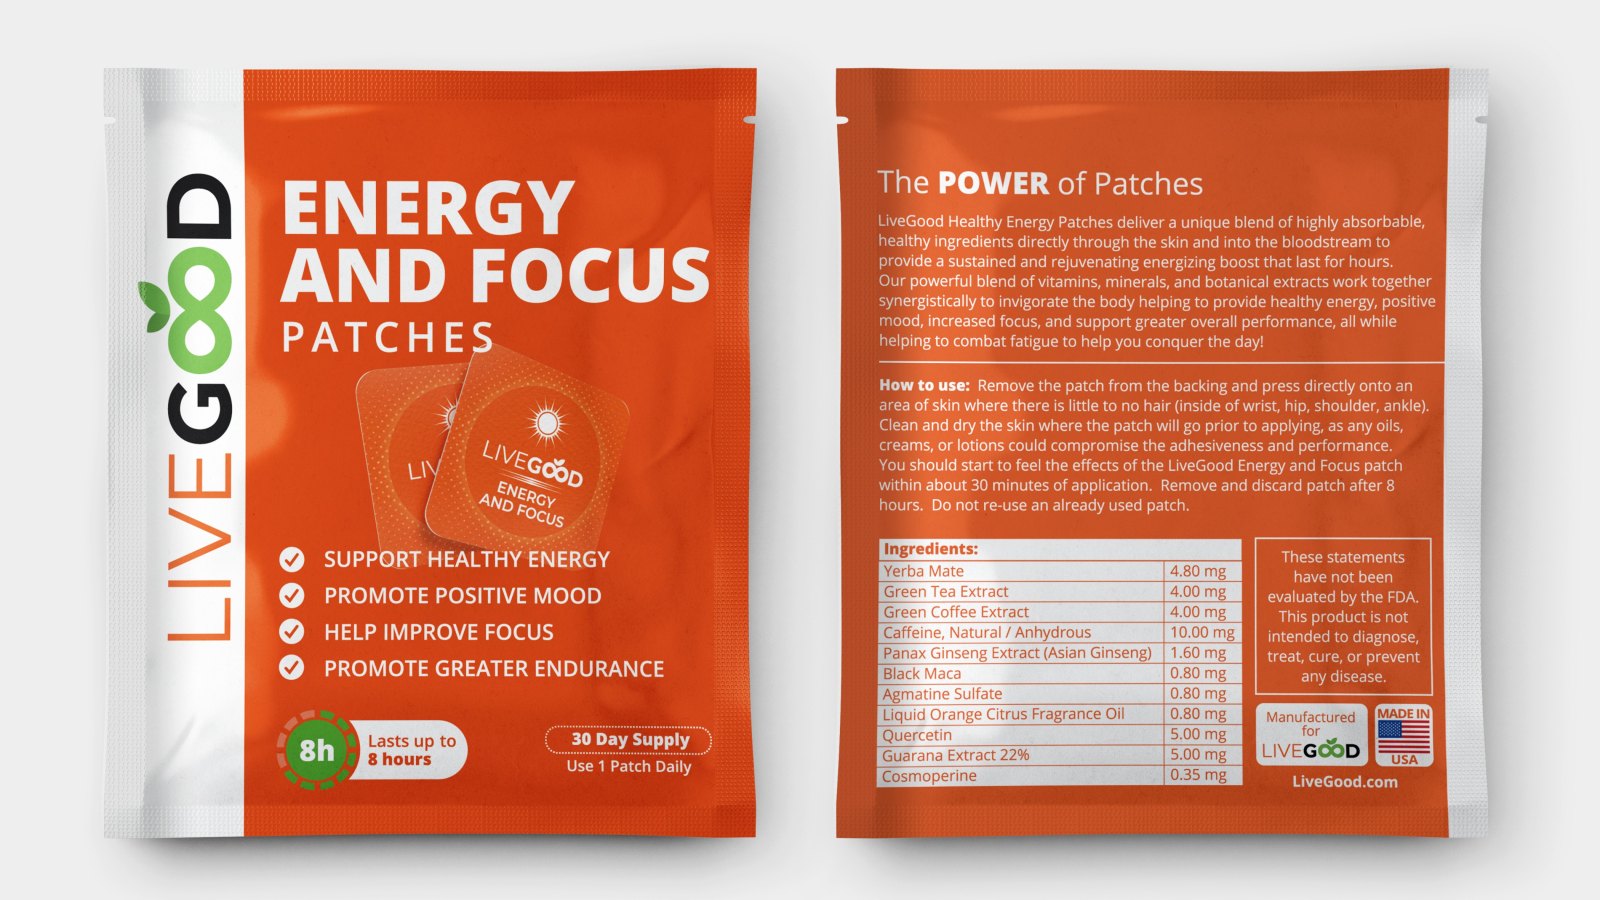 LiveGood-Energy-and-Focus-Patches-Packaging-Final-V2-Mockup-a